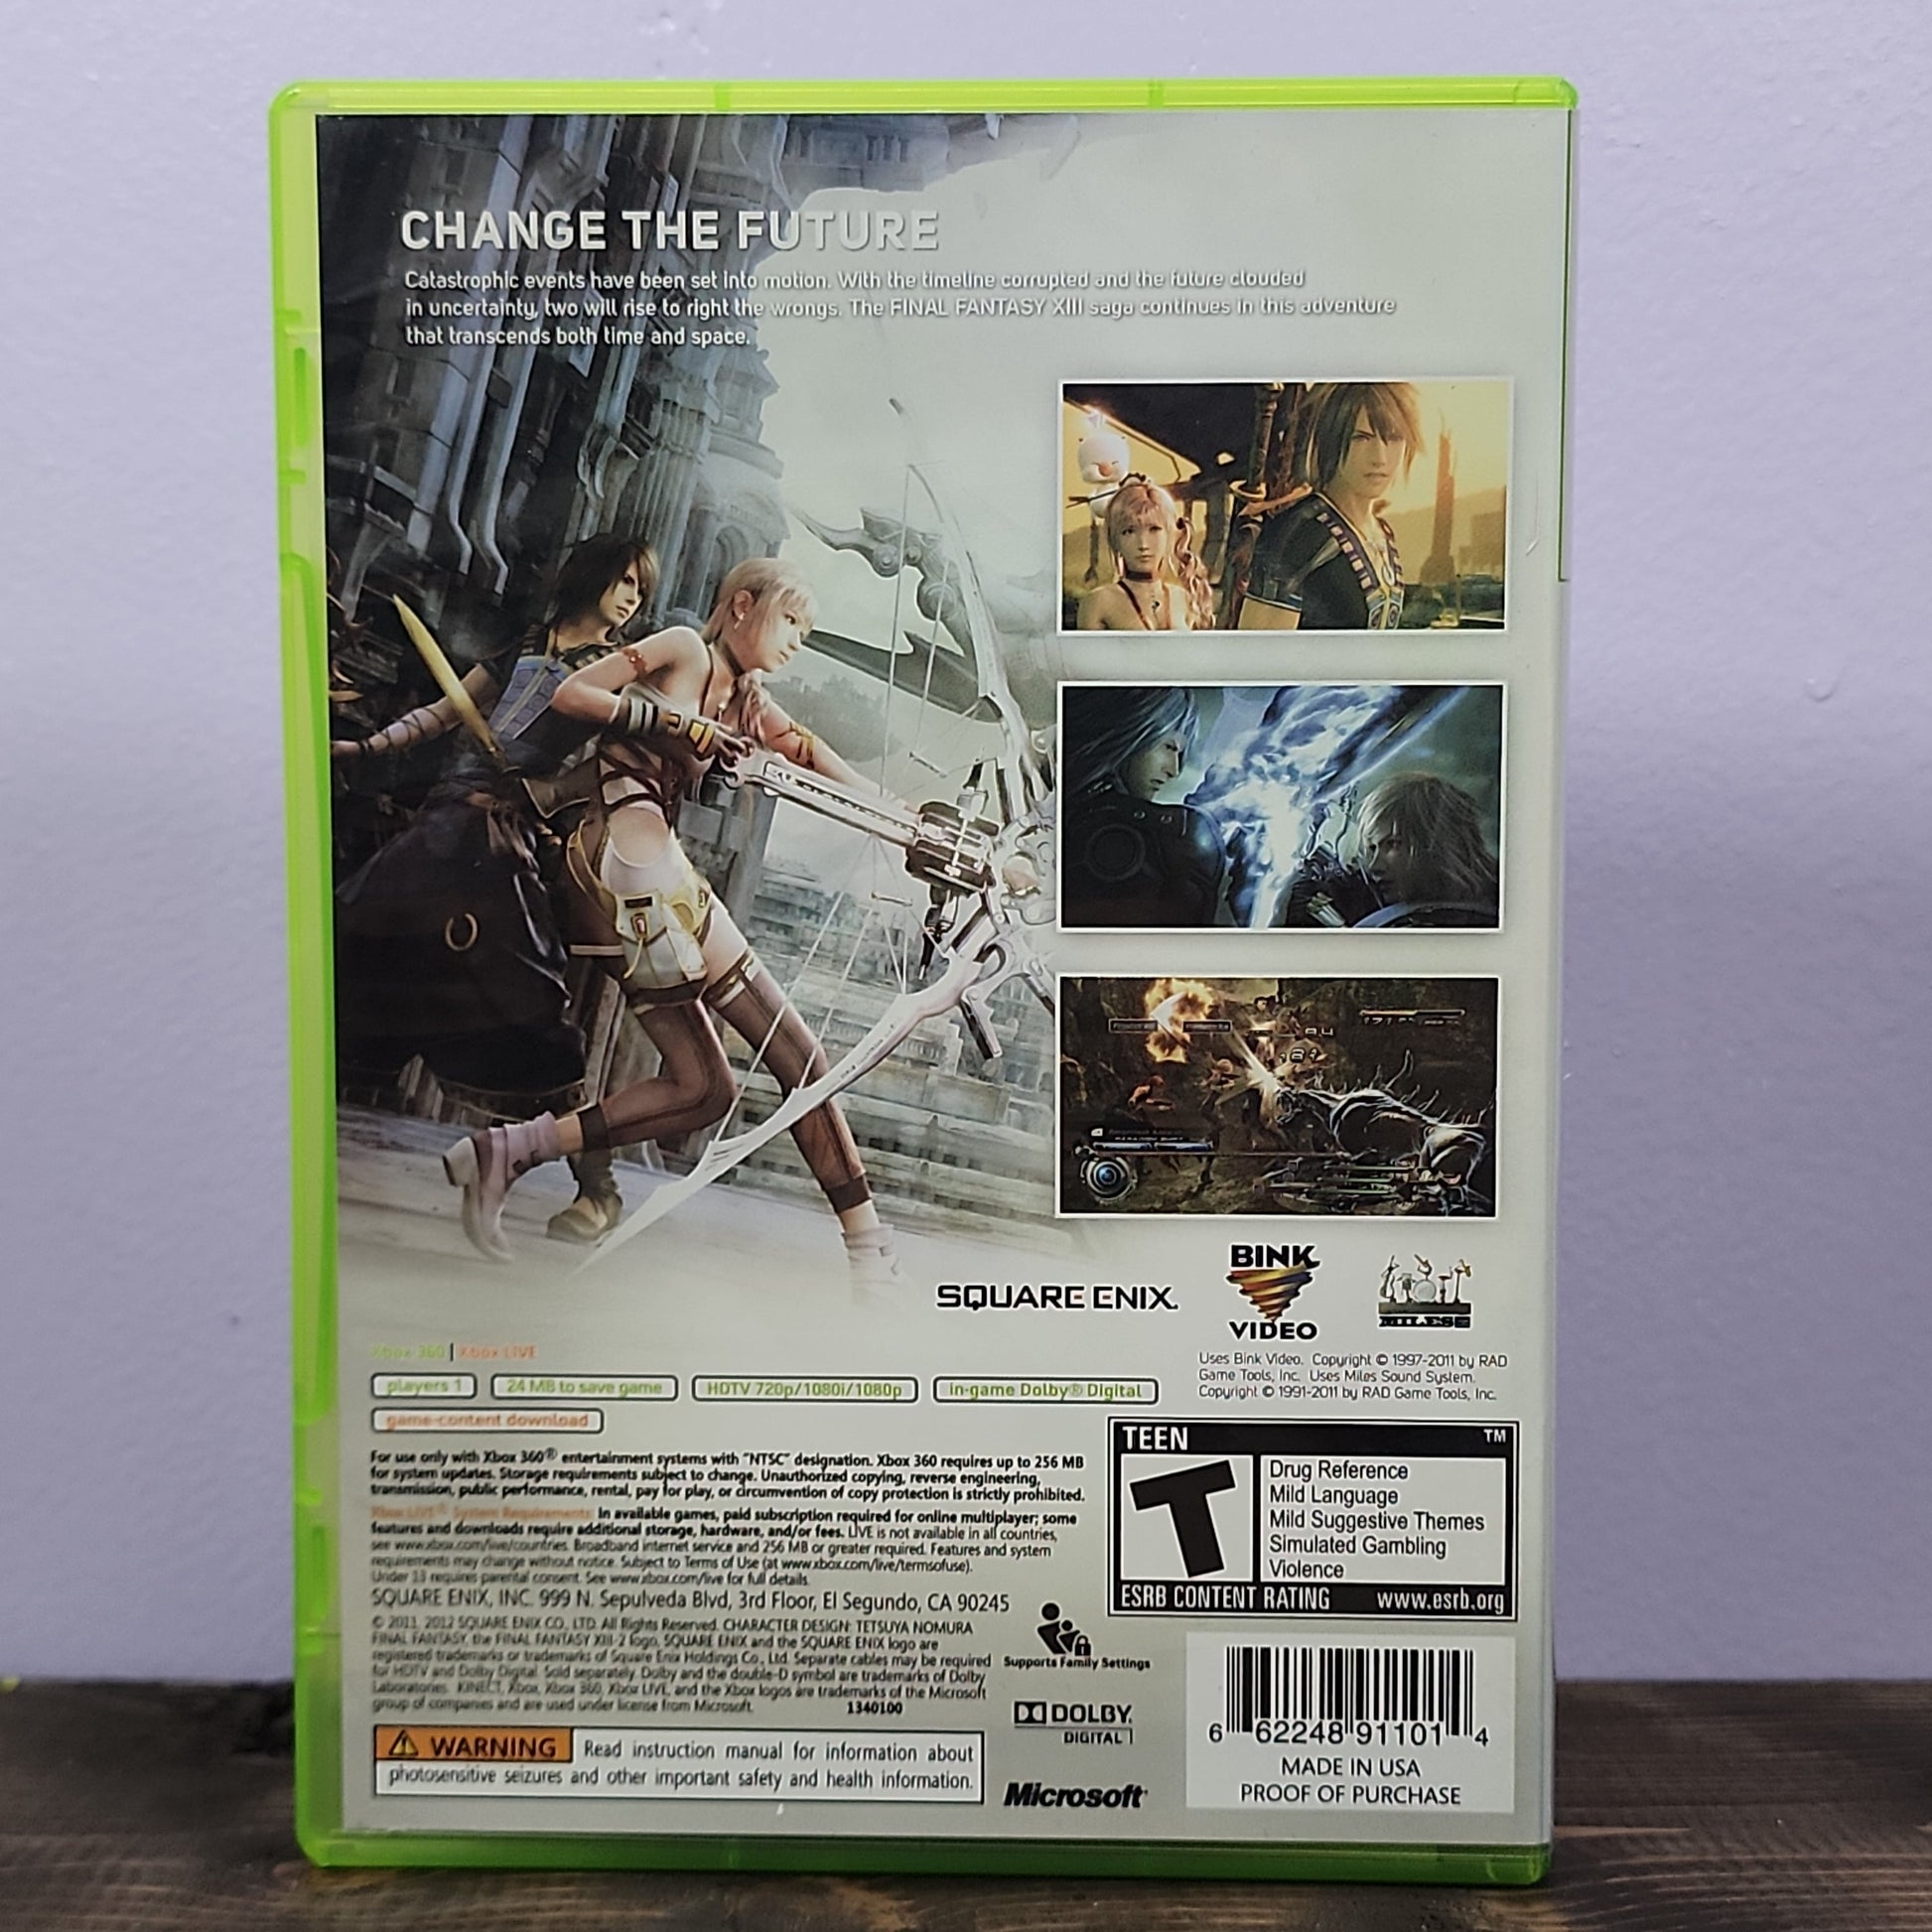 Xbox 360 - Final Fantasy XIII-2 Retrograde Collectibles CIB, Female Protagonist, Final Fantasy Series, JRPG, RPG, Square Enix, T Rated, Weeb, Xbox 360 Preowned Video Game 